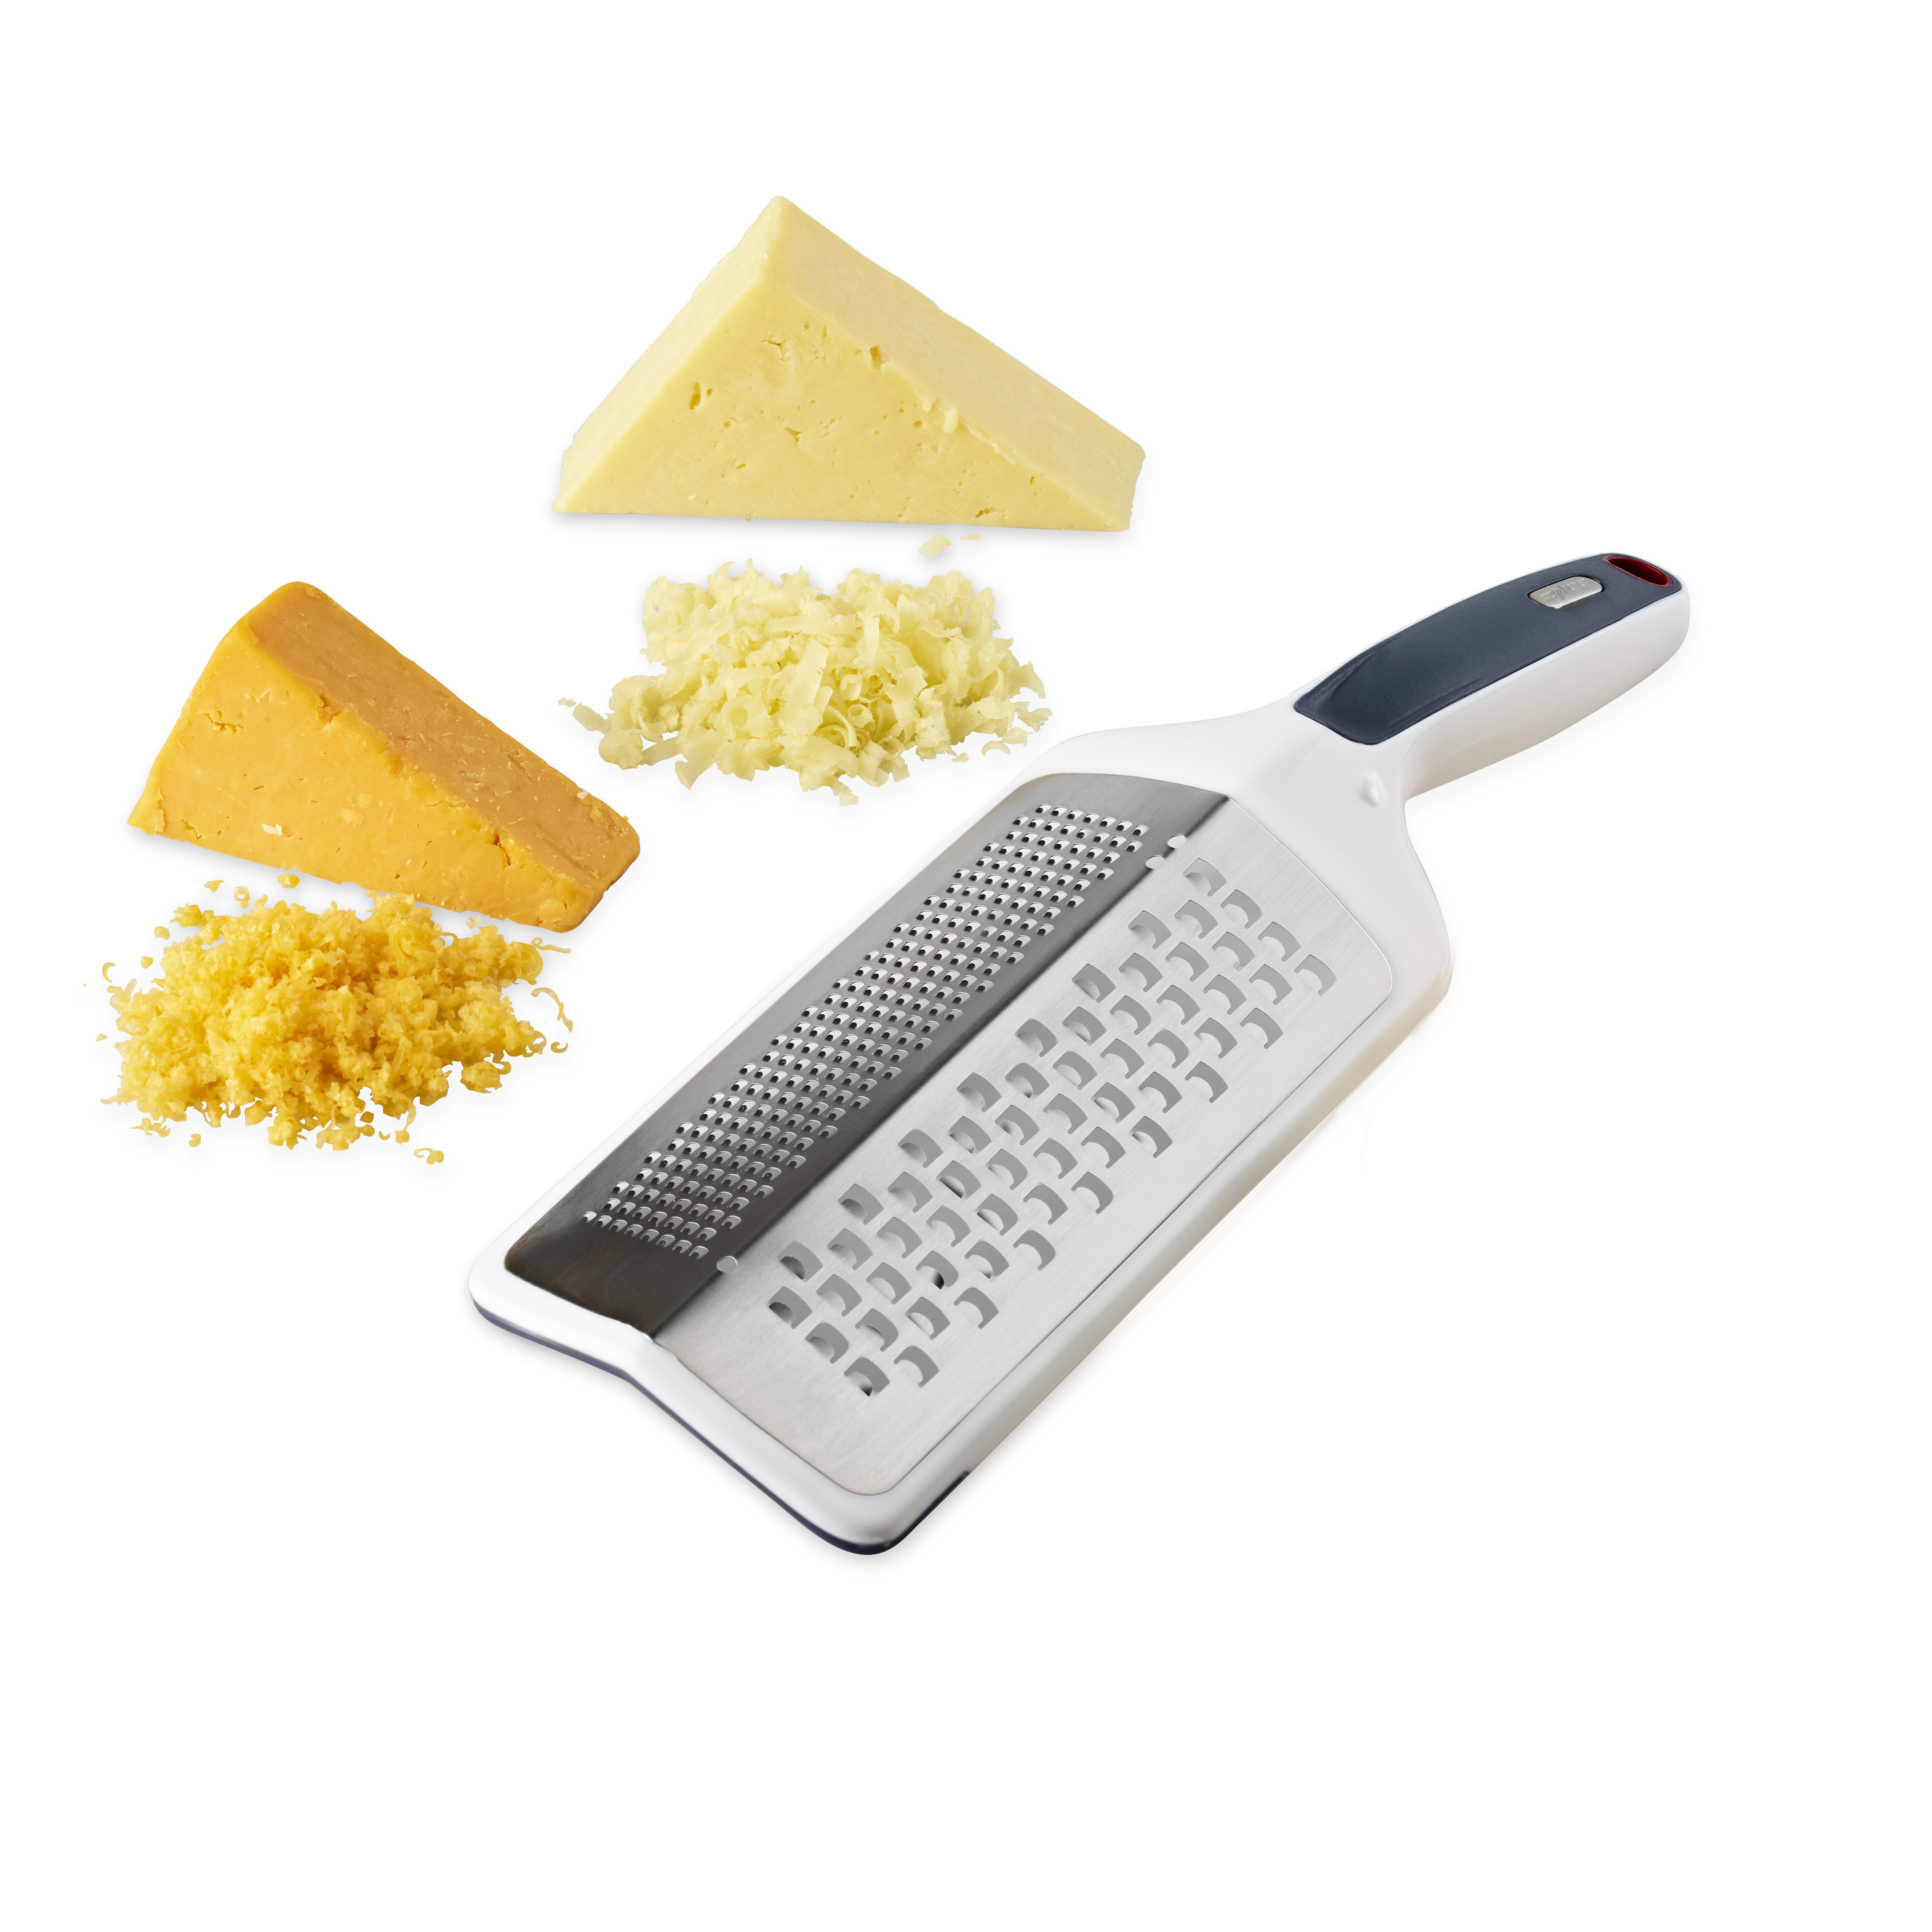 Zyliss 2-in-1 Zester - Cooks